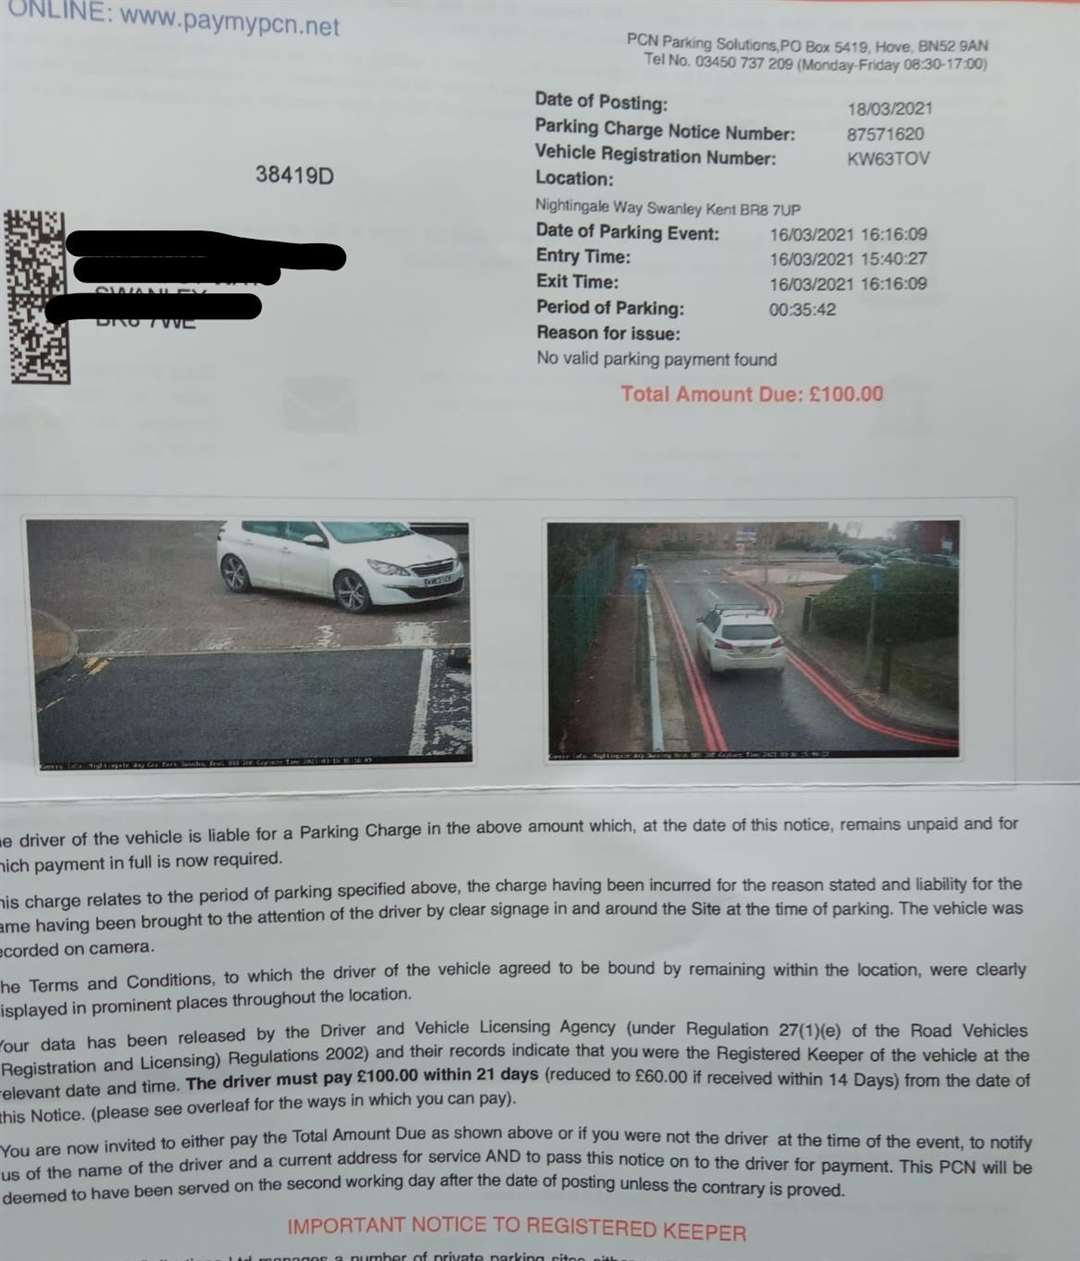 Swanley residents claim they have been hit with parking fines for 'driving through' a road to access other services.